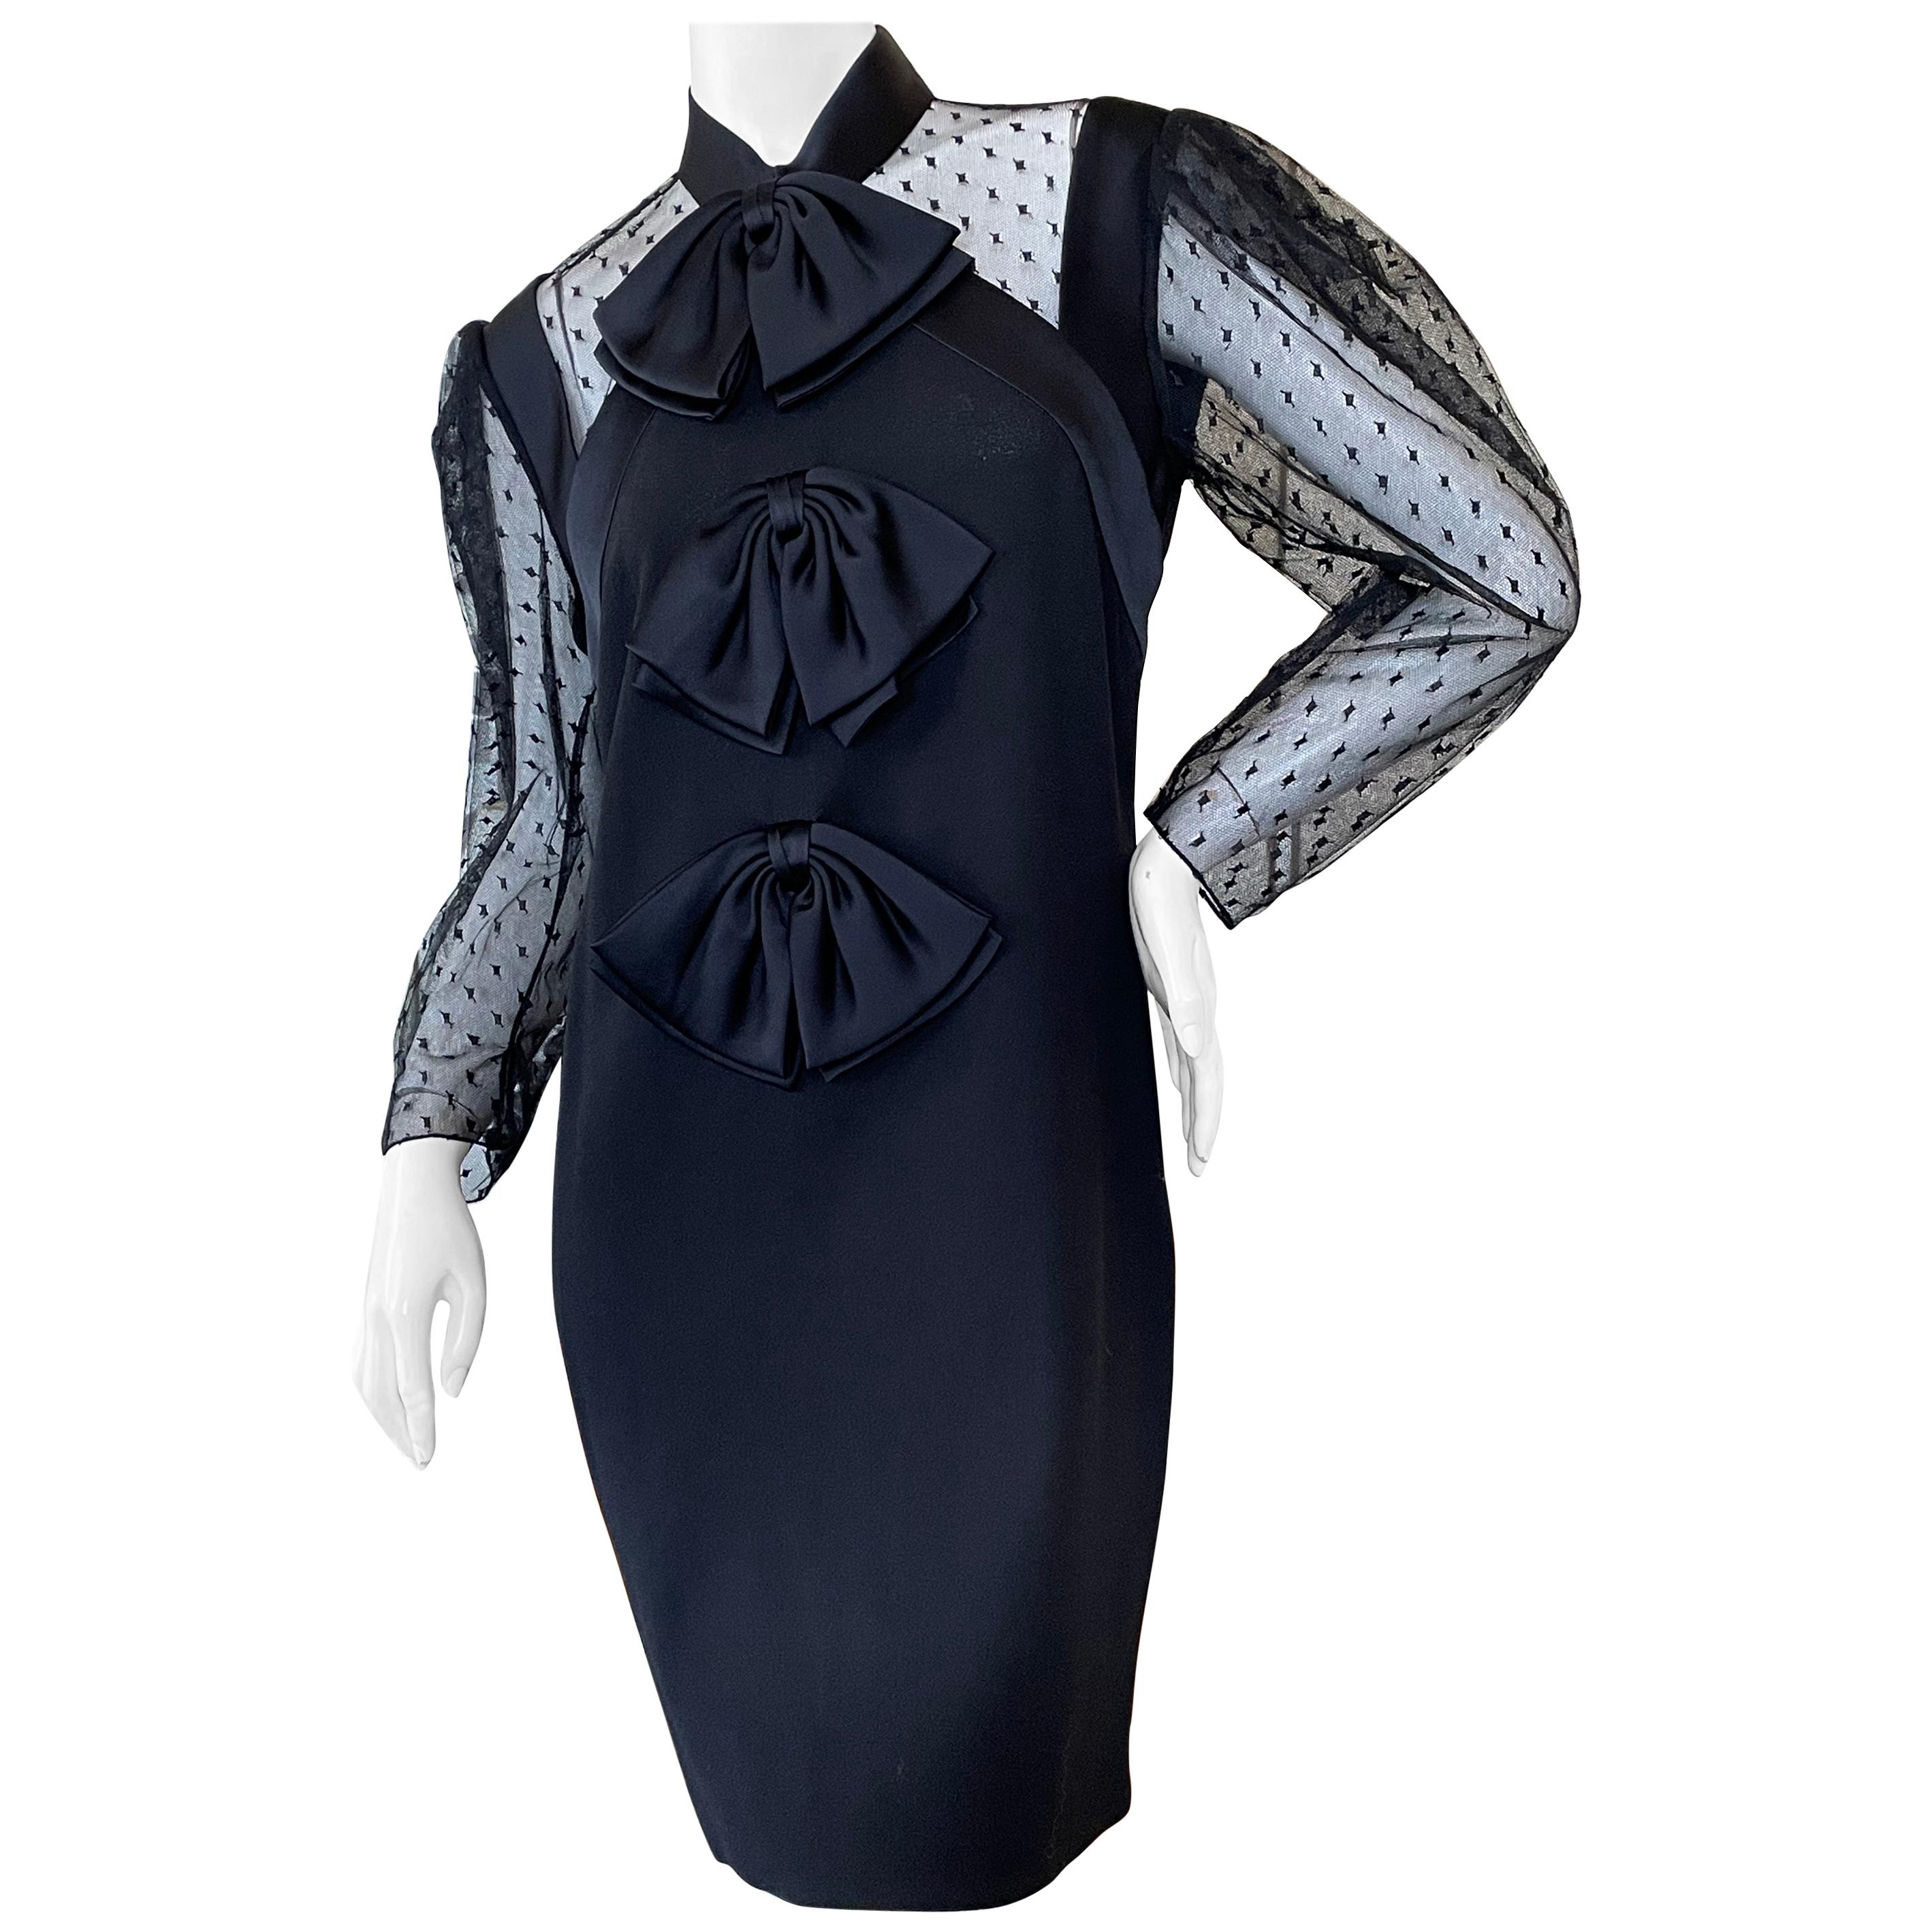 Givenchy Sheer Dot Dress w Bows by Clare Waight Keller New from Bergdorf Goodman